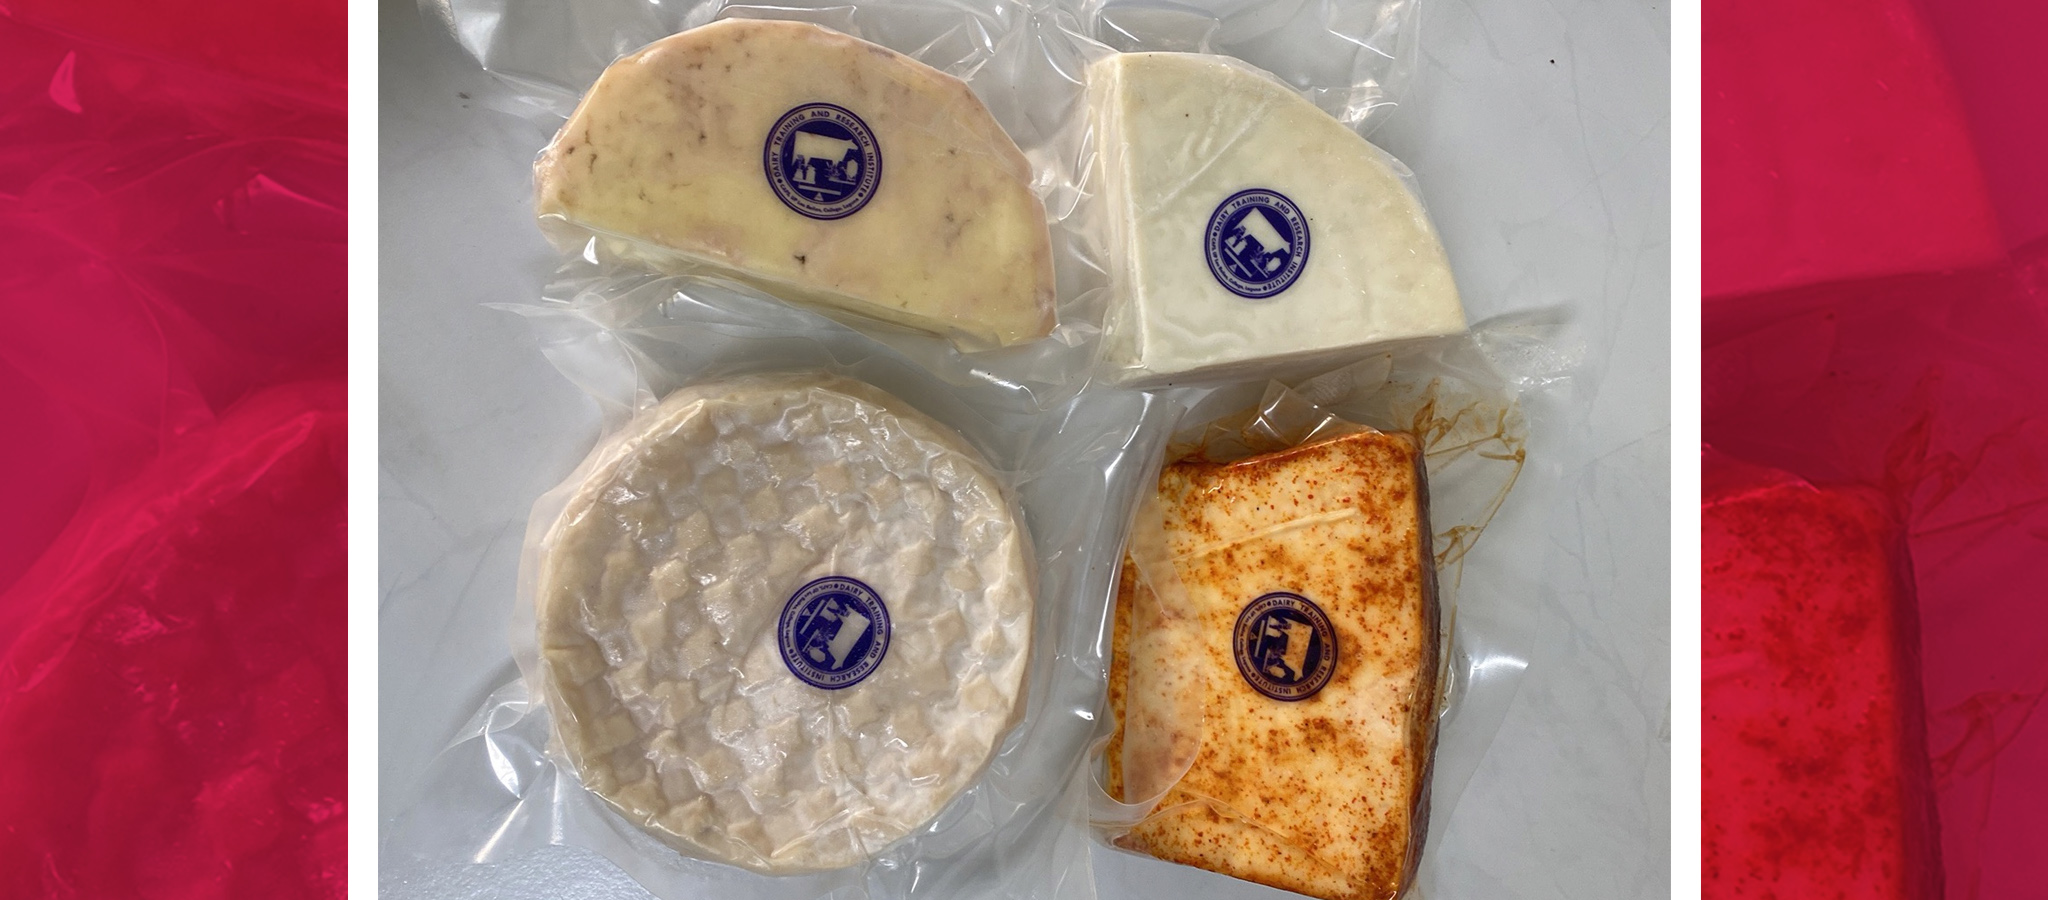 Say “cheese” with more DTRI cheeses